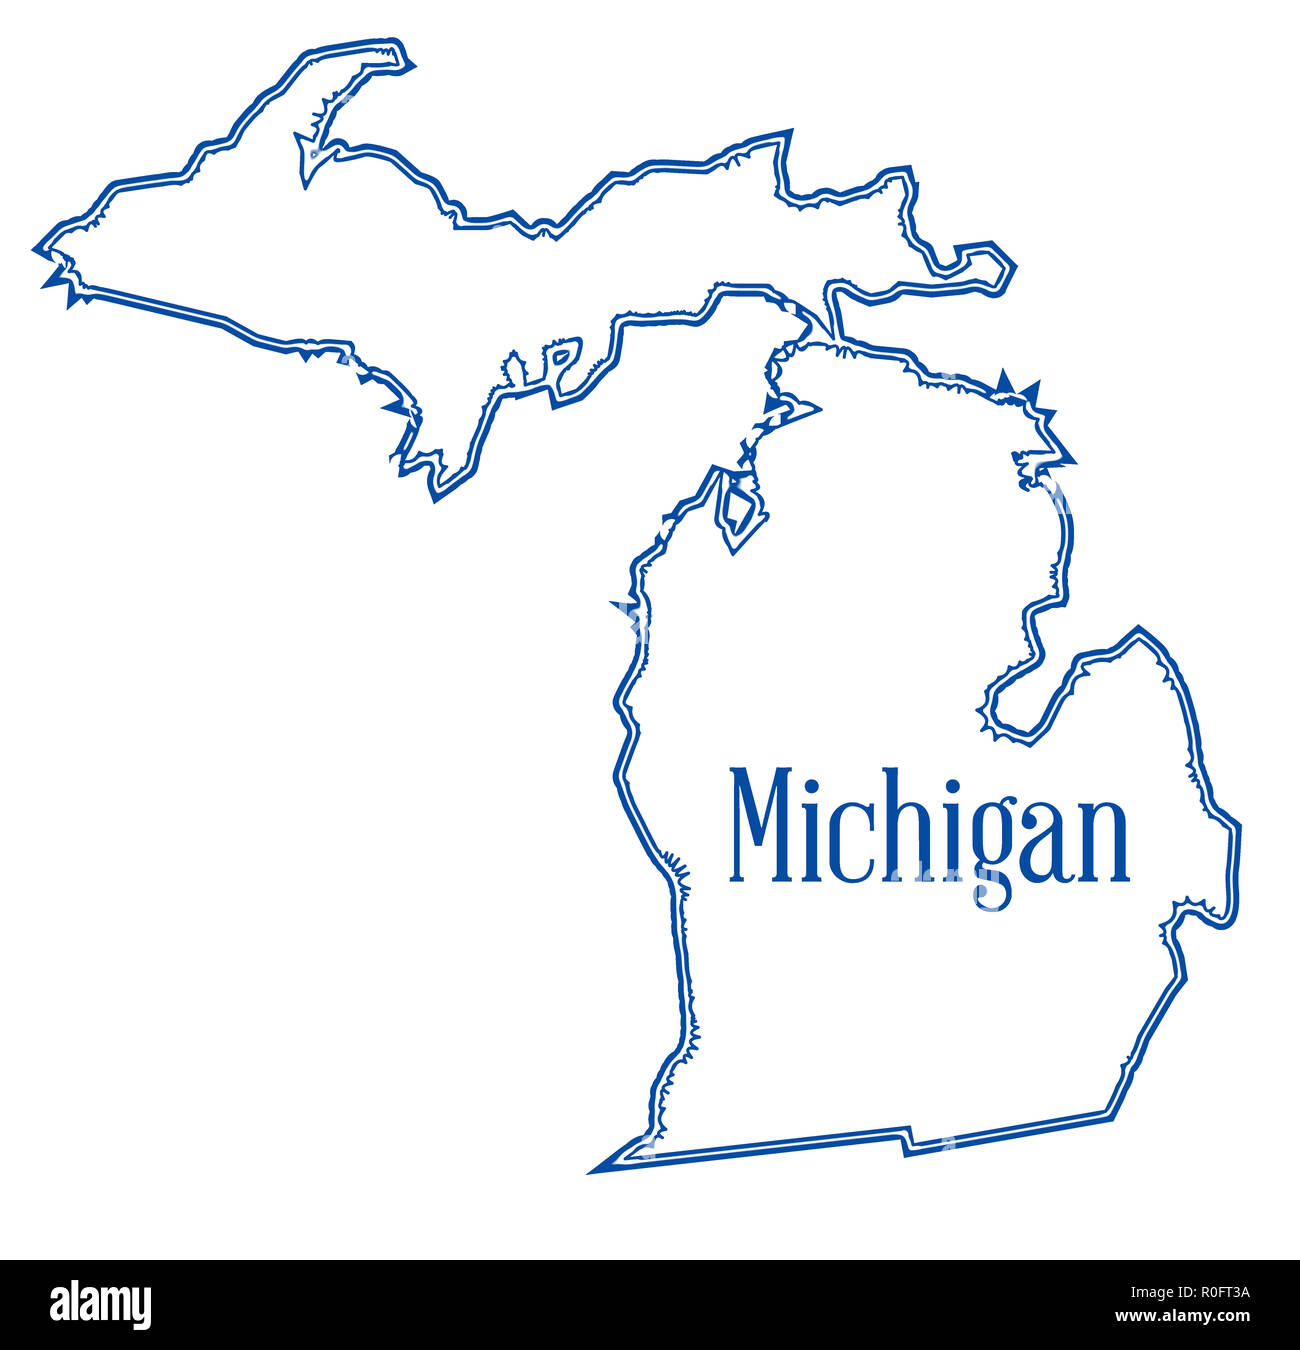 Outline Map Of The State Of Michigan Stock Photo Alamy